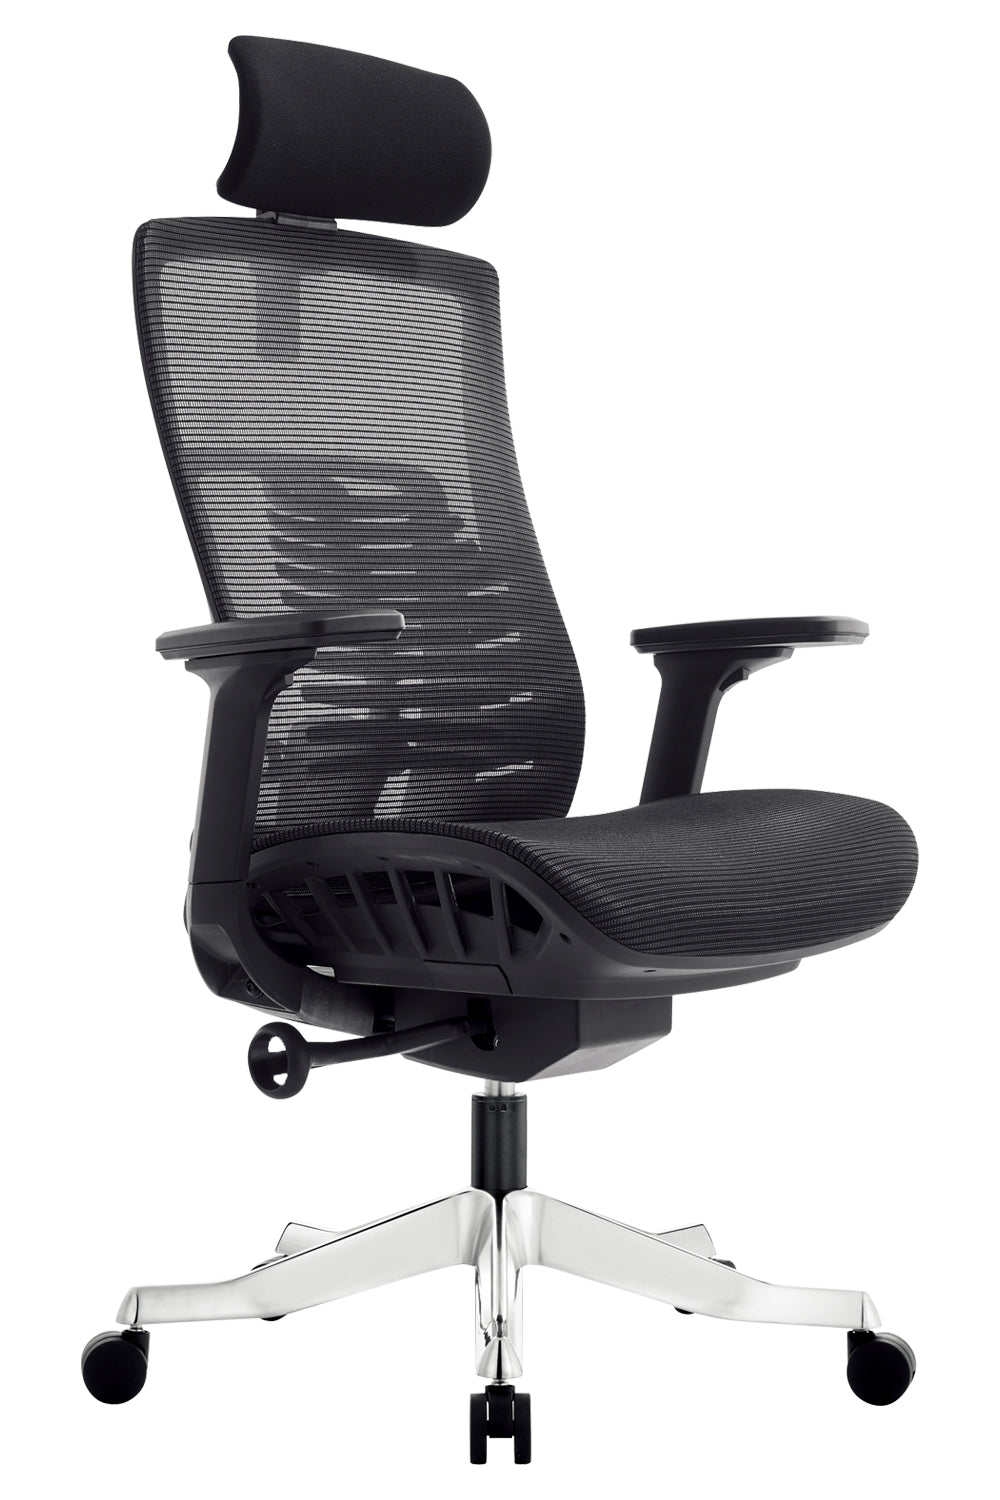 Apollo High Back 3D Workstation Swivel Chair with Mesh Seat And Aluminum die cast Base  - Black